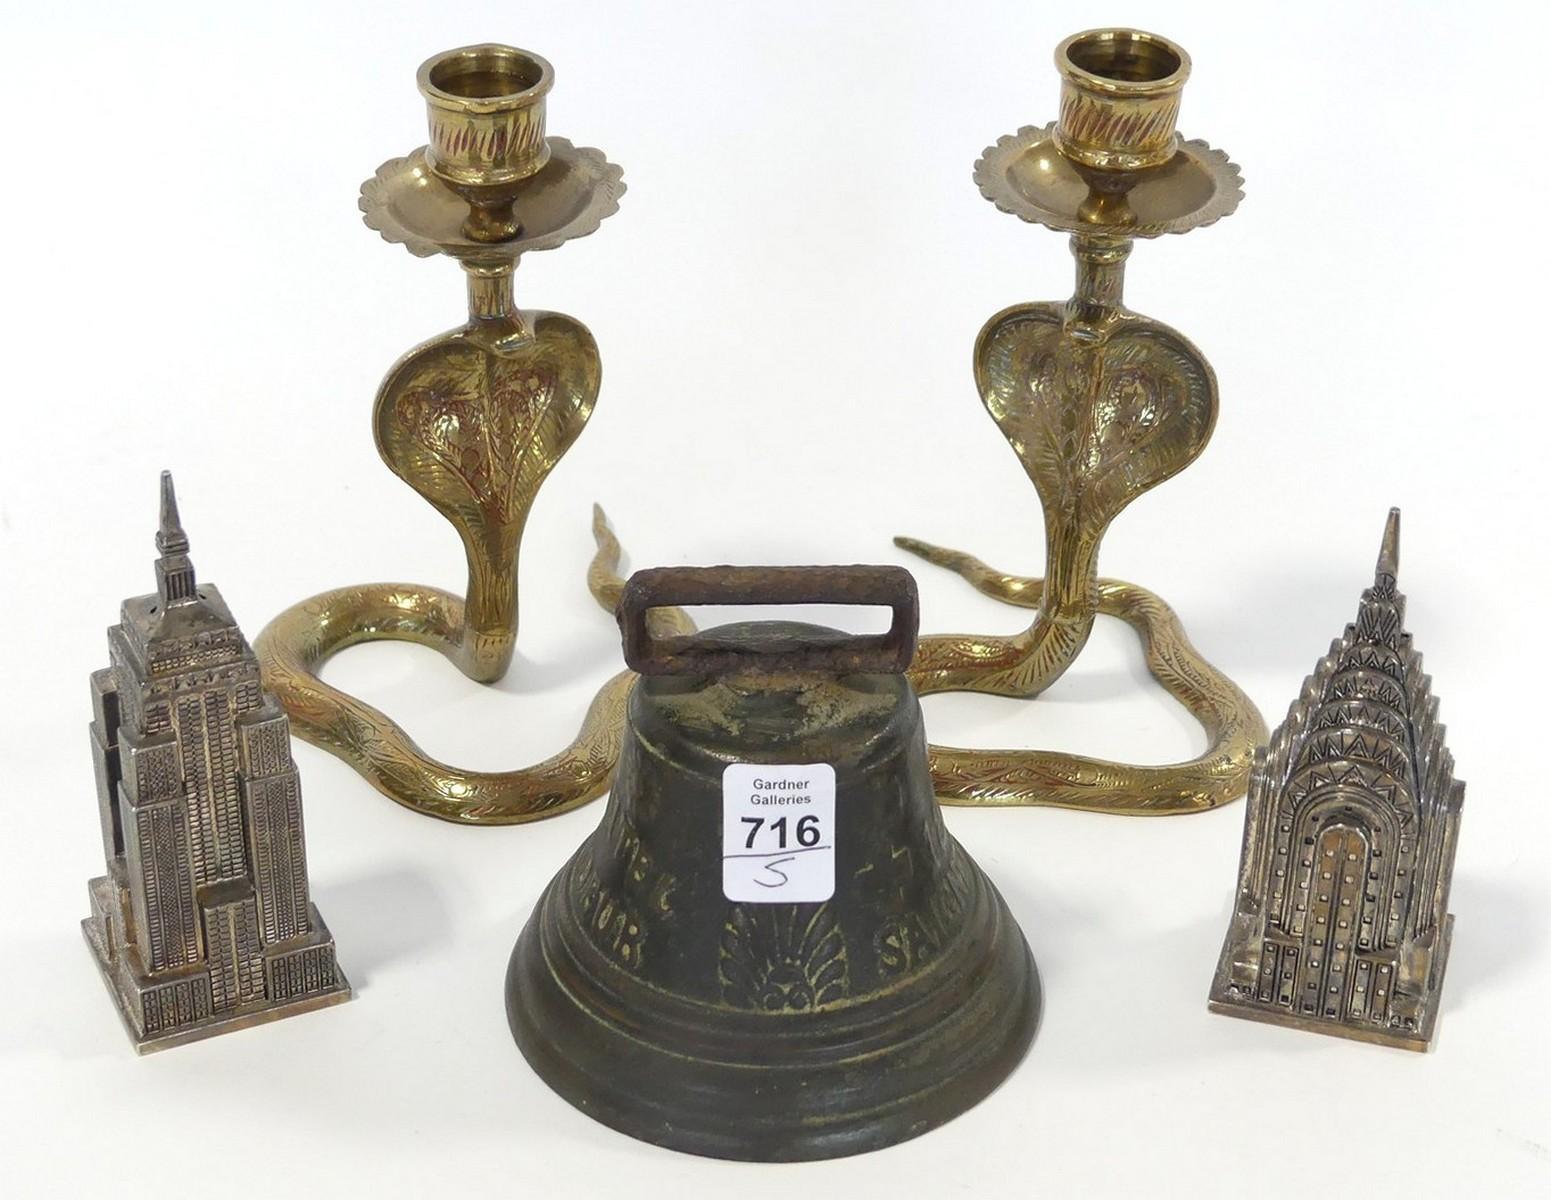 BELL, SHAKERS AND CANDLESTICKS